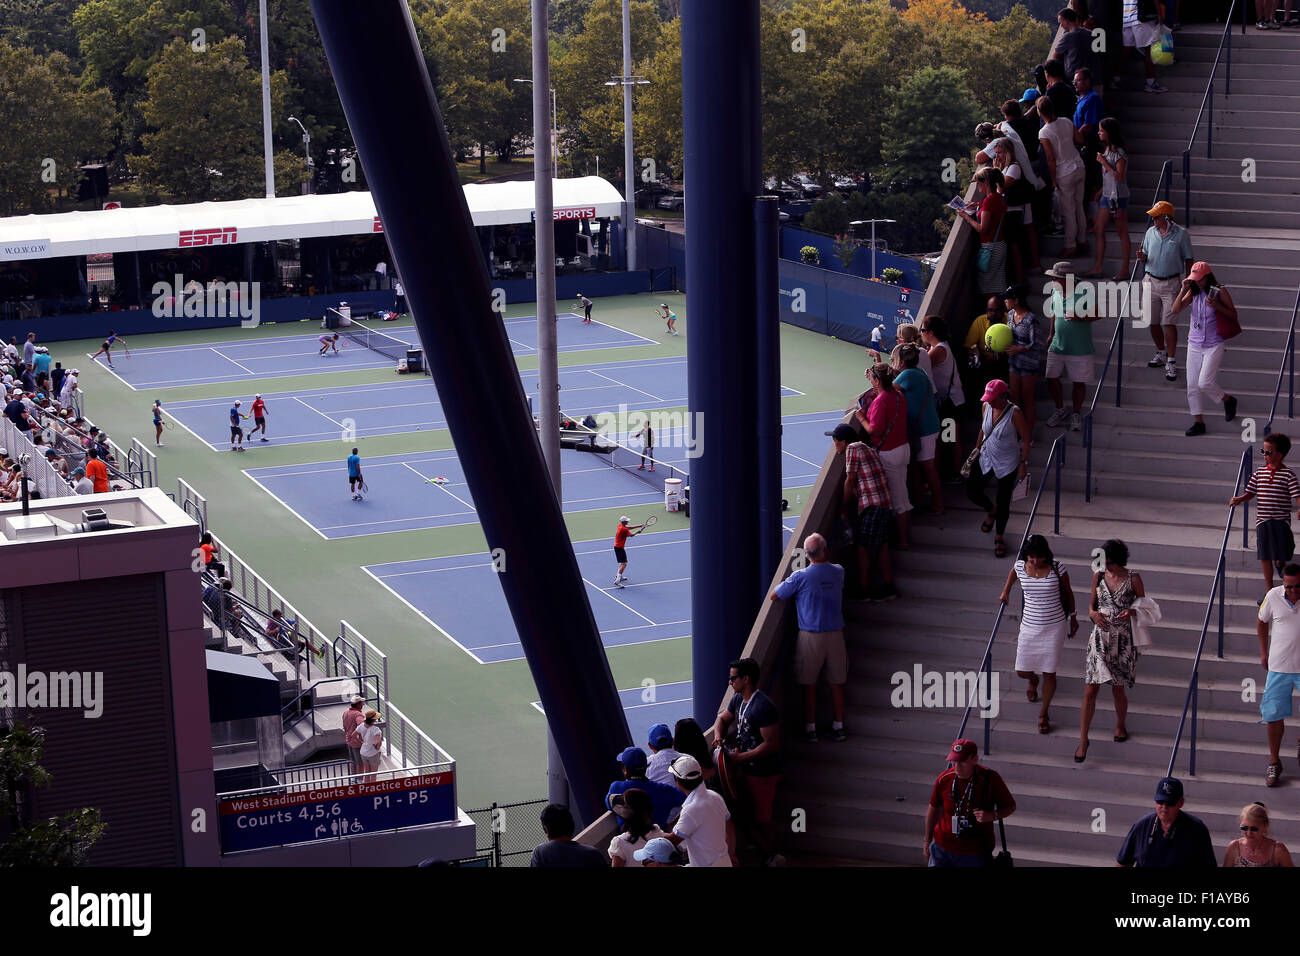 New York, USA. 31st Aug, 2015. Crowds enjoying the first day of play at the U.S. Open in Flushing Meadows, New York on Monday, August 31st. Credit:  Adam Stoltman/Alamy Live News Stock Photo